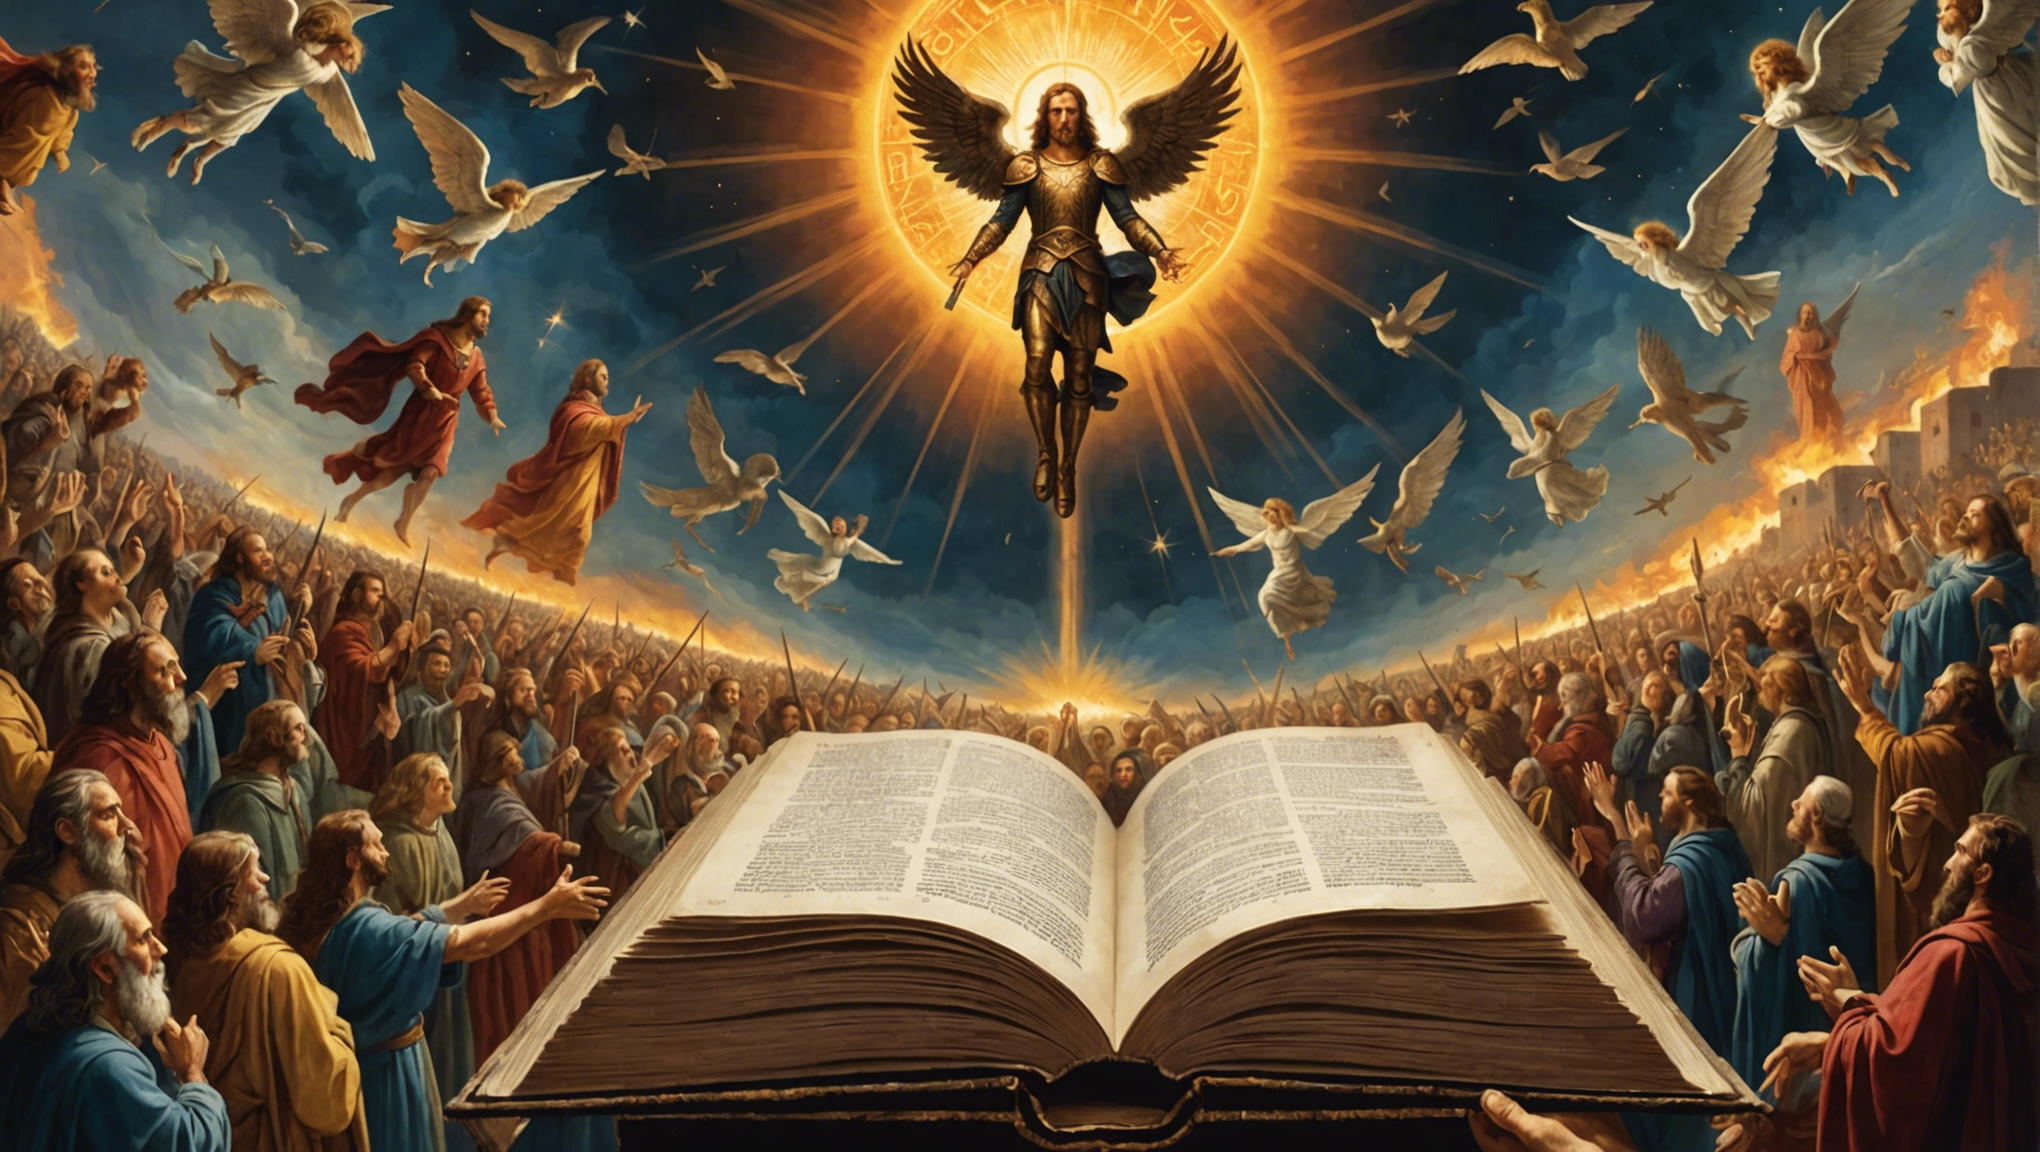 discover the meanings and significance of the symbols in the book of revelation with an in-depth exploration. uncover the hidden messages and interpretations behind the symbolic imagery.